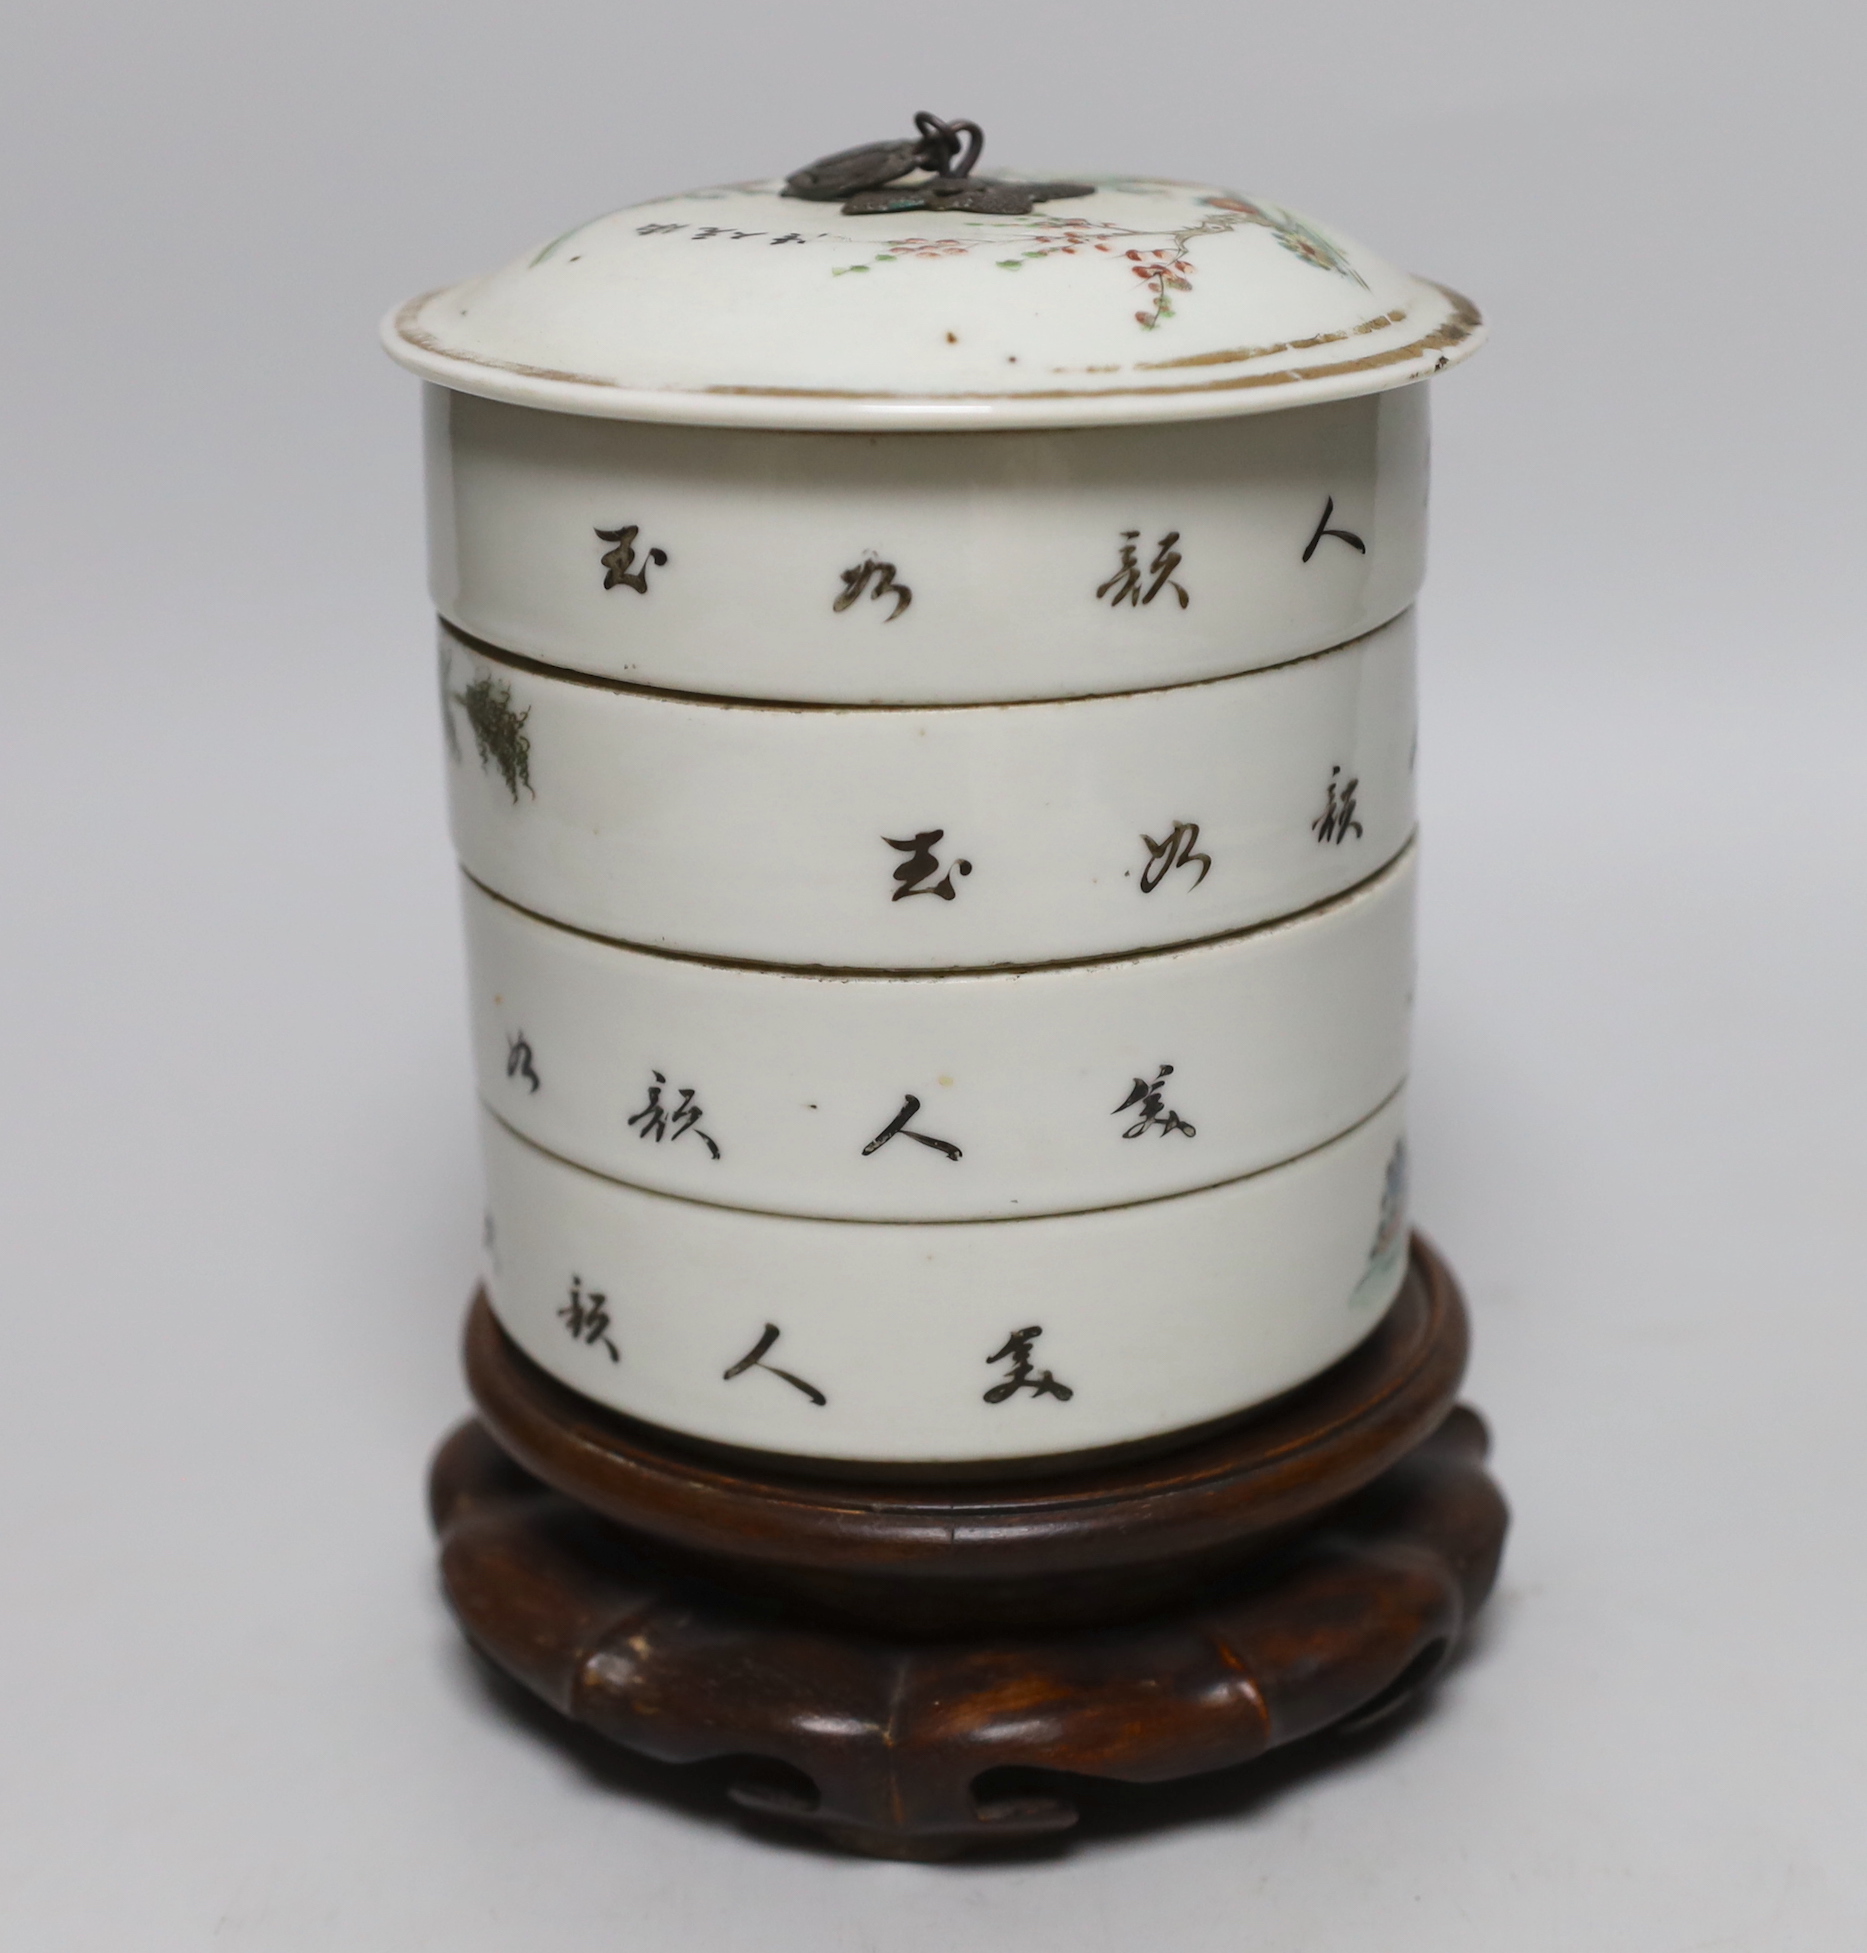 A set of early 20th century Chinese stacking containers on hardwood stand, 18cm